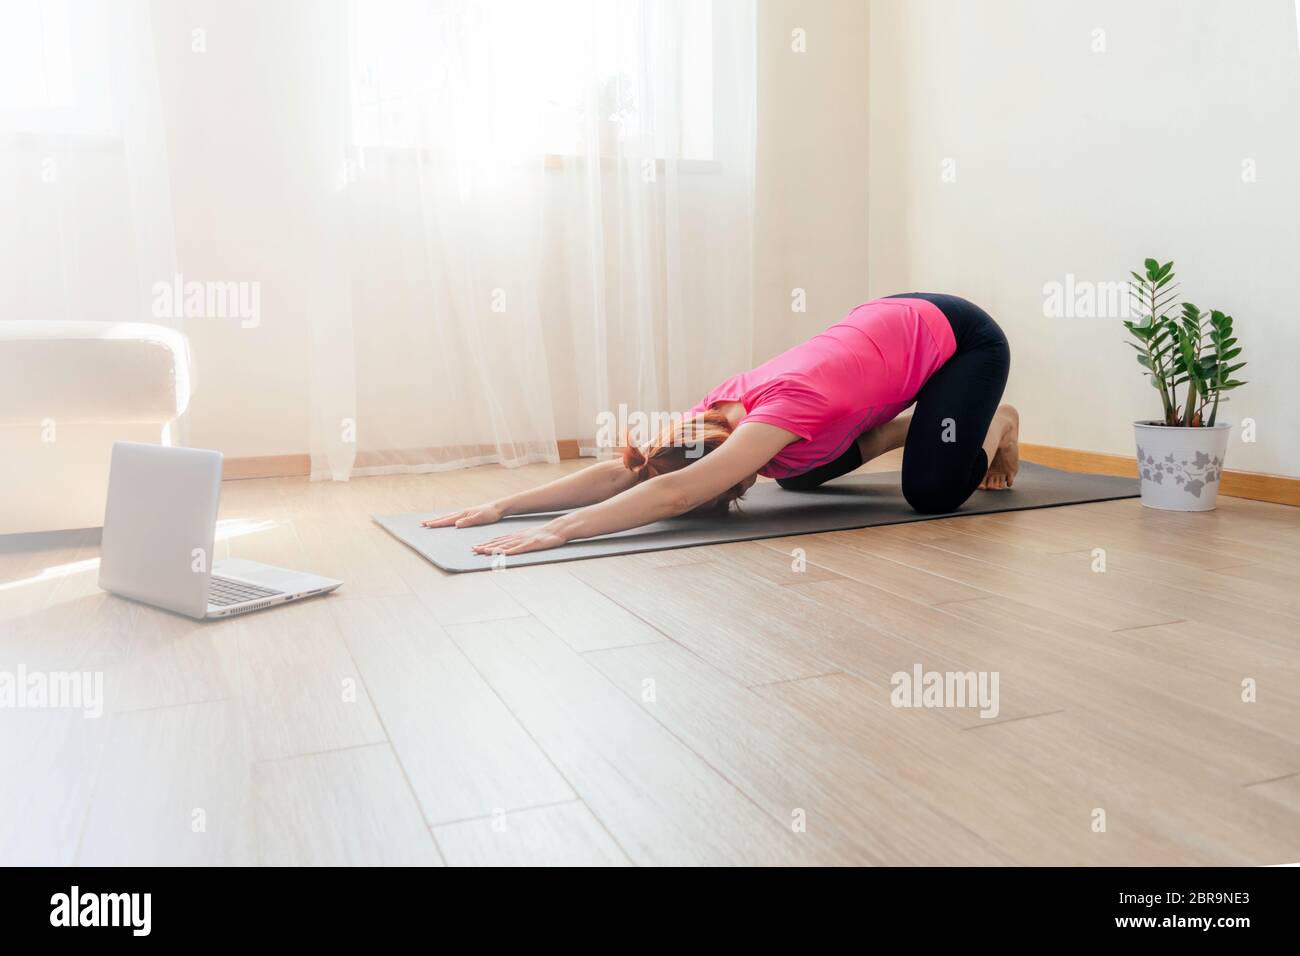 Young woman training on floor at home, doing plank and watching videos on laptop. Yoga, pilates, working out exercising. Quarantine at home. Stock Photo